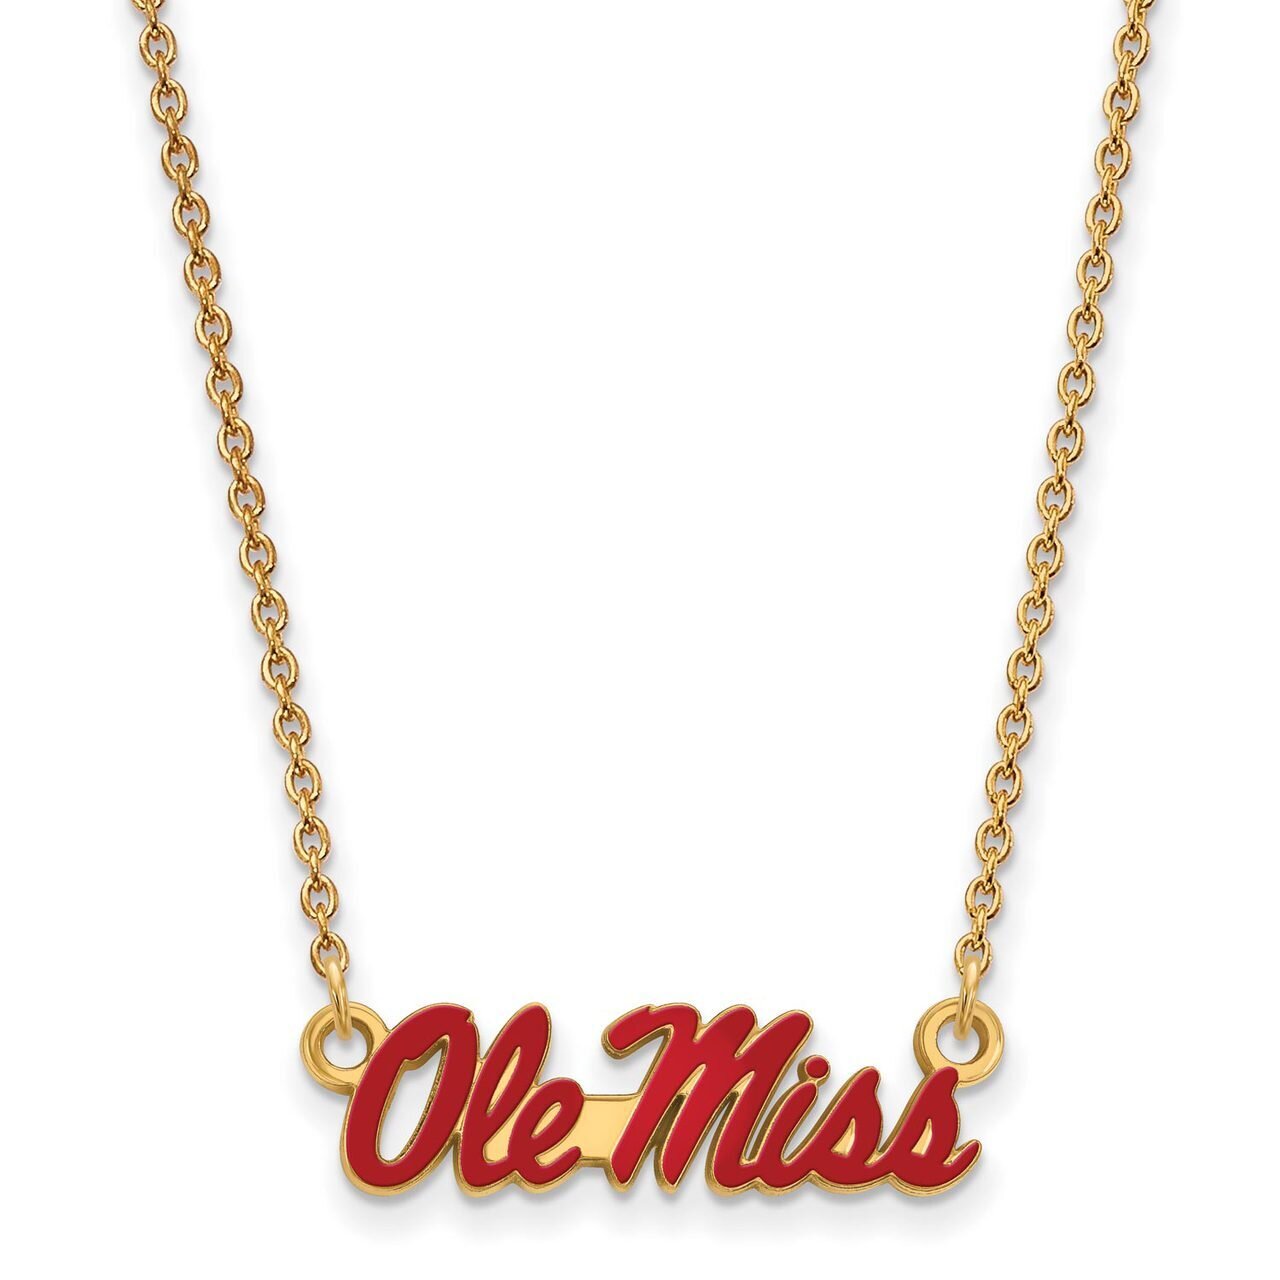 University of Mississippi Small Enamel Pendant with Chain Necklace Gold-plated Silver GP080UMS-18